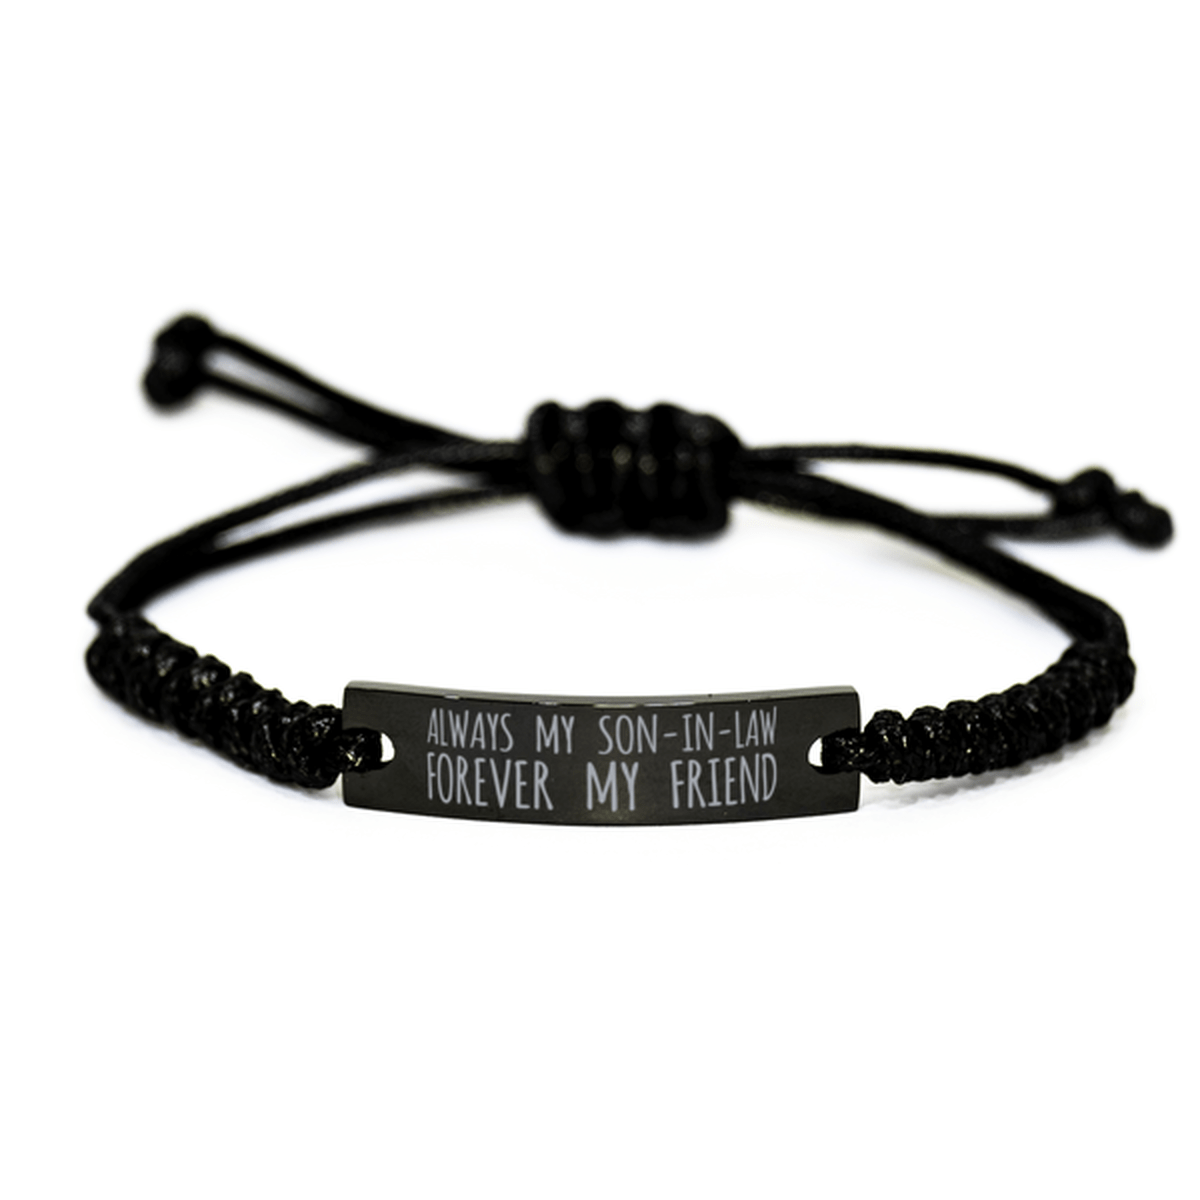 Inspirational Son-In-Law Black Rope Bracelet, Always My Son-In-Law Forever My Friend, Best Birthday Gifts For Family